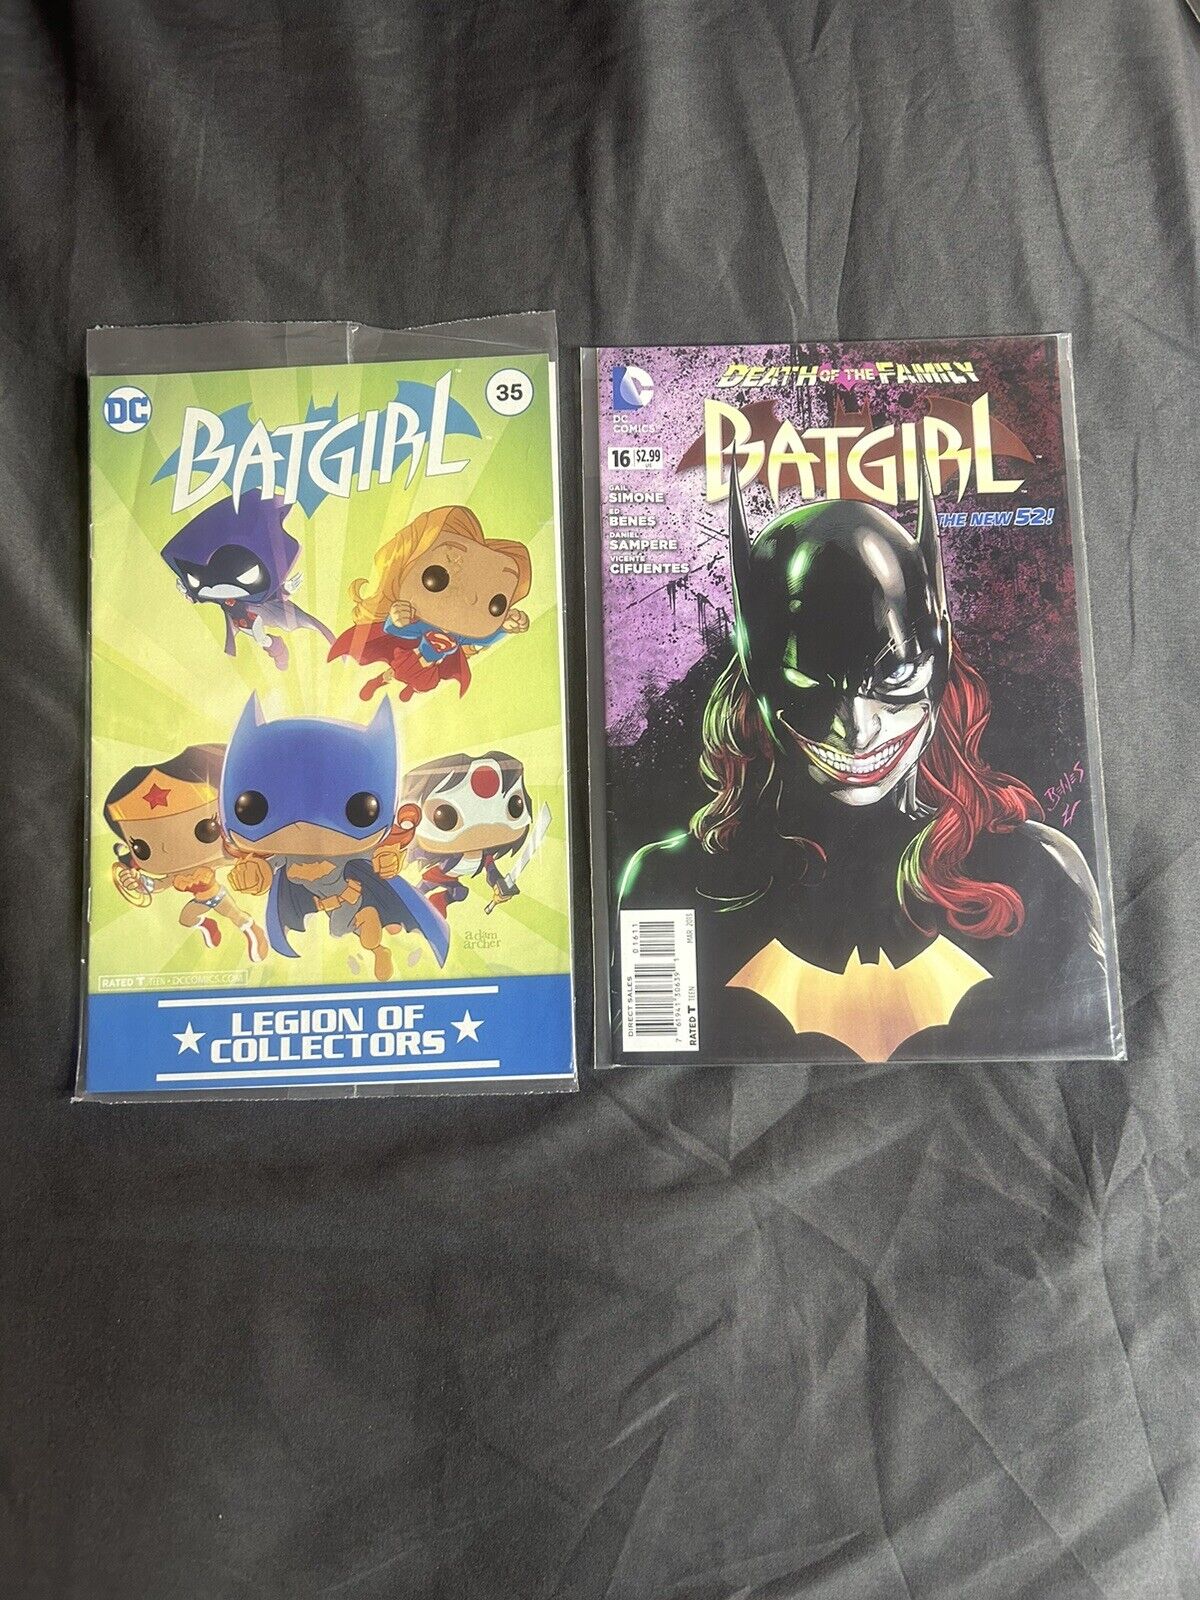 Batgirl #35 2016 Funko DC Exclusive Variant/Batgirl Death Of The Family #16 2013